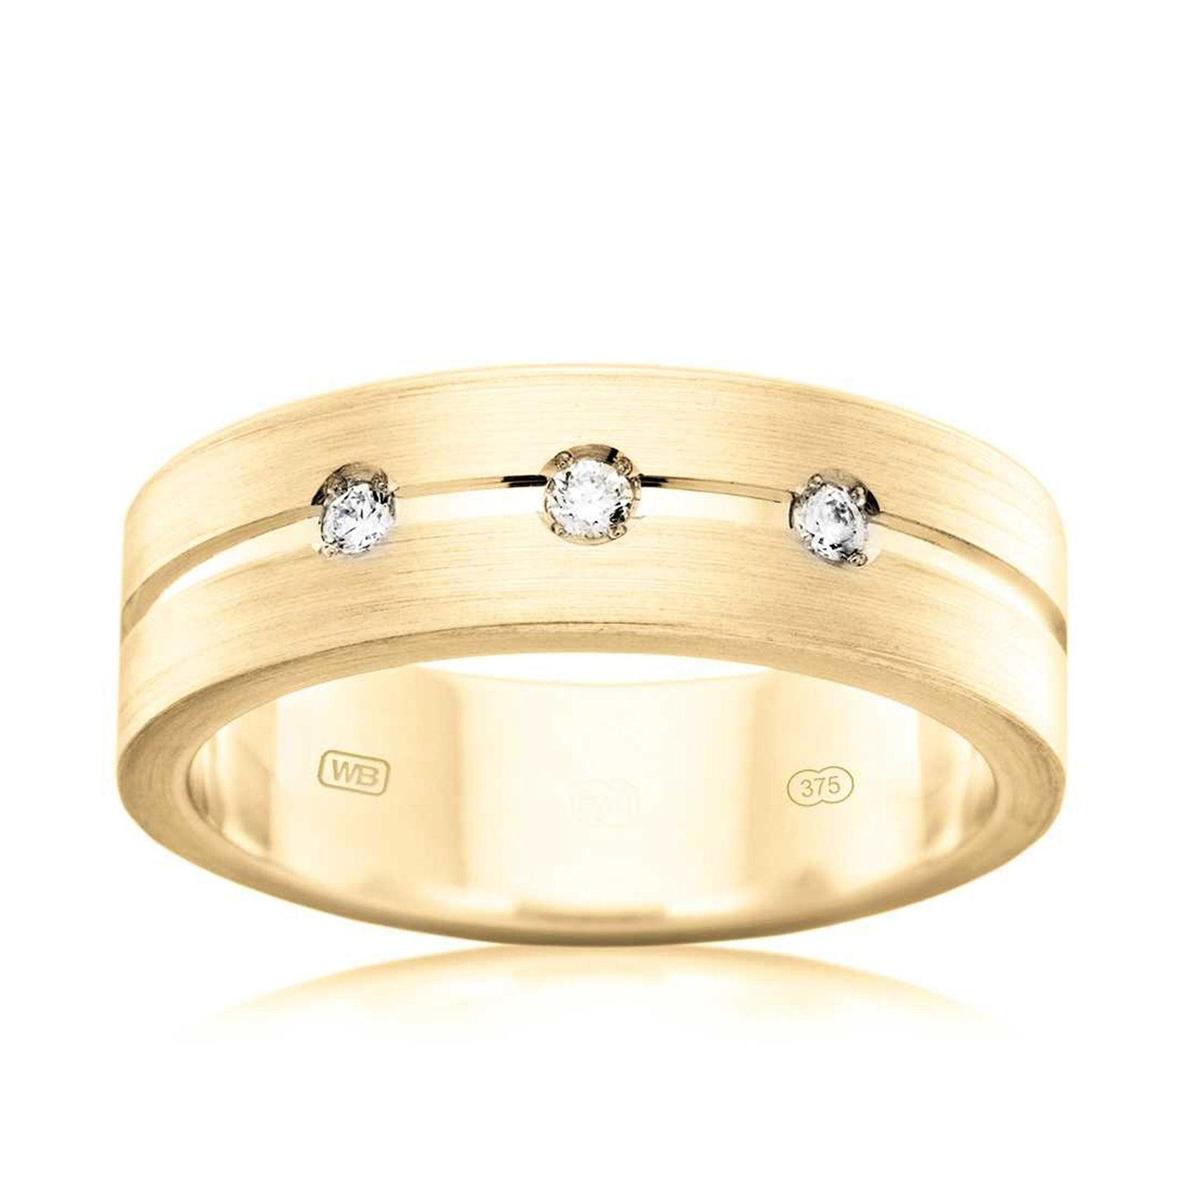 Men's Diamond Wedding Band in 9ct Yellow Gold TGW 0.09 offers in Wallace Bishop